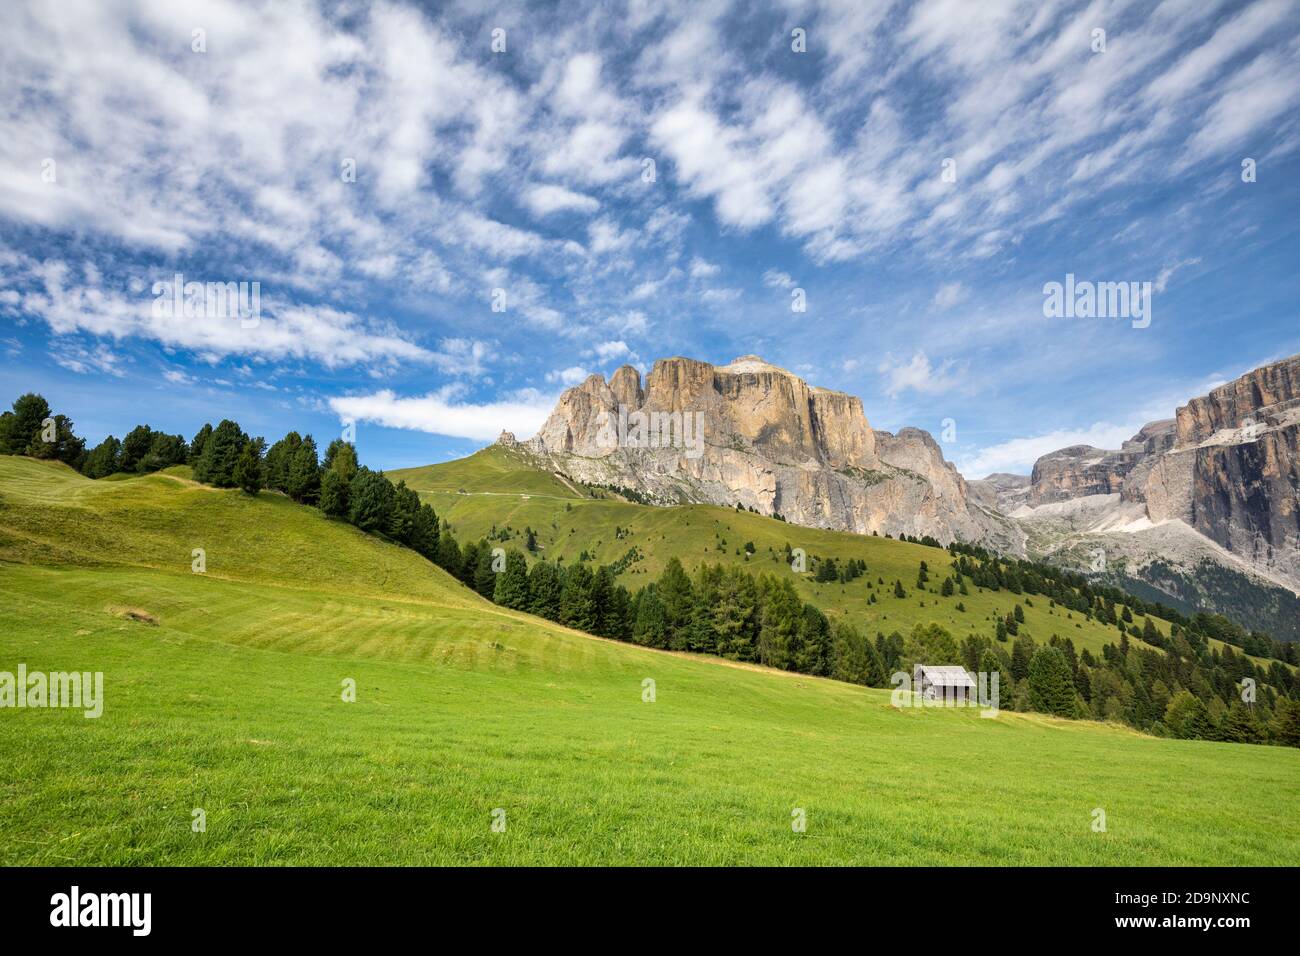 Lonely wooden cabin in Salèi valley, on the background Sella Towers / Sellatürme and  Piz Ciavazes, Canazei, Fassa valley, Dolomites, Trentino Alto Adige, Italy Stock Photo